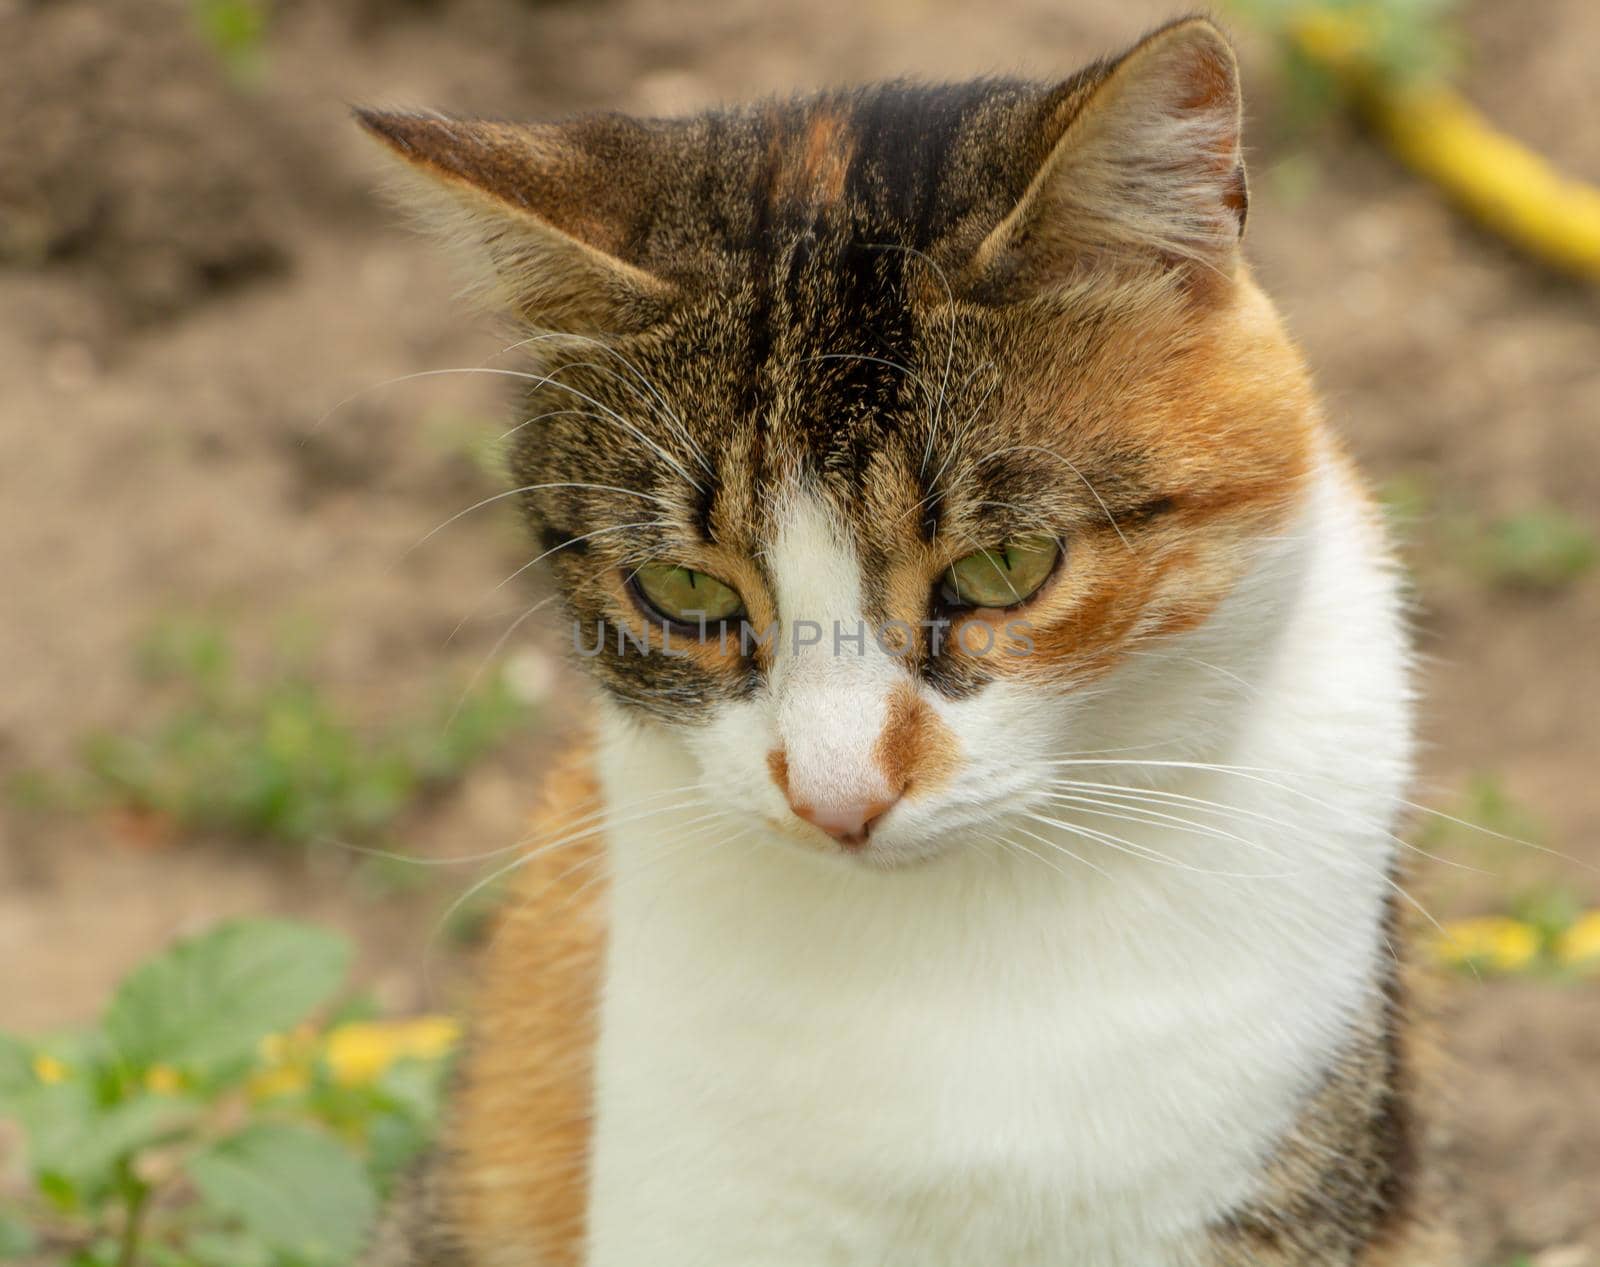 An adorable cat sits thoughtfully, cat with green eyes by Mindru